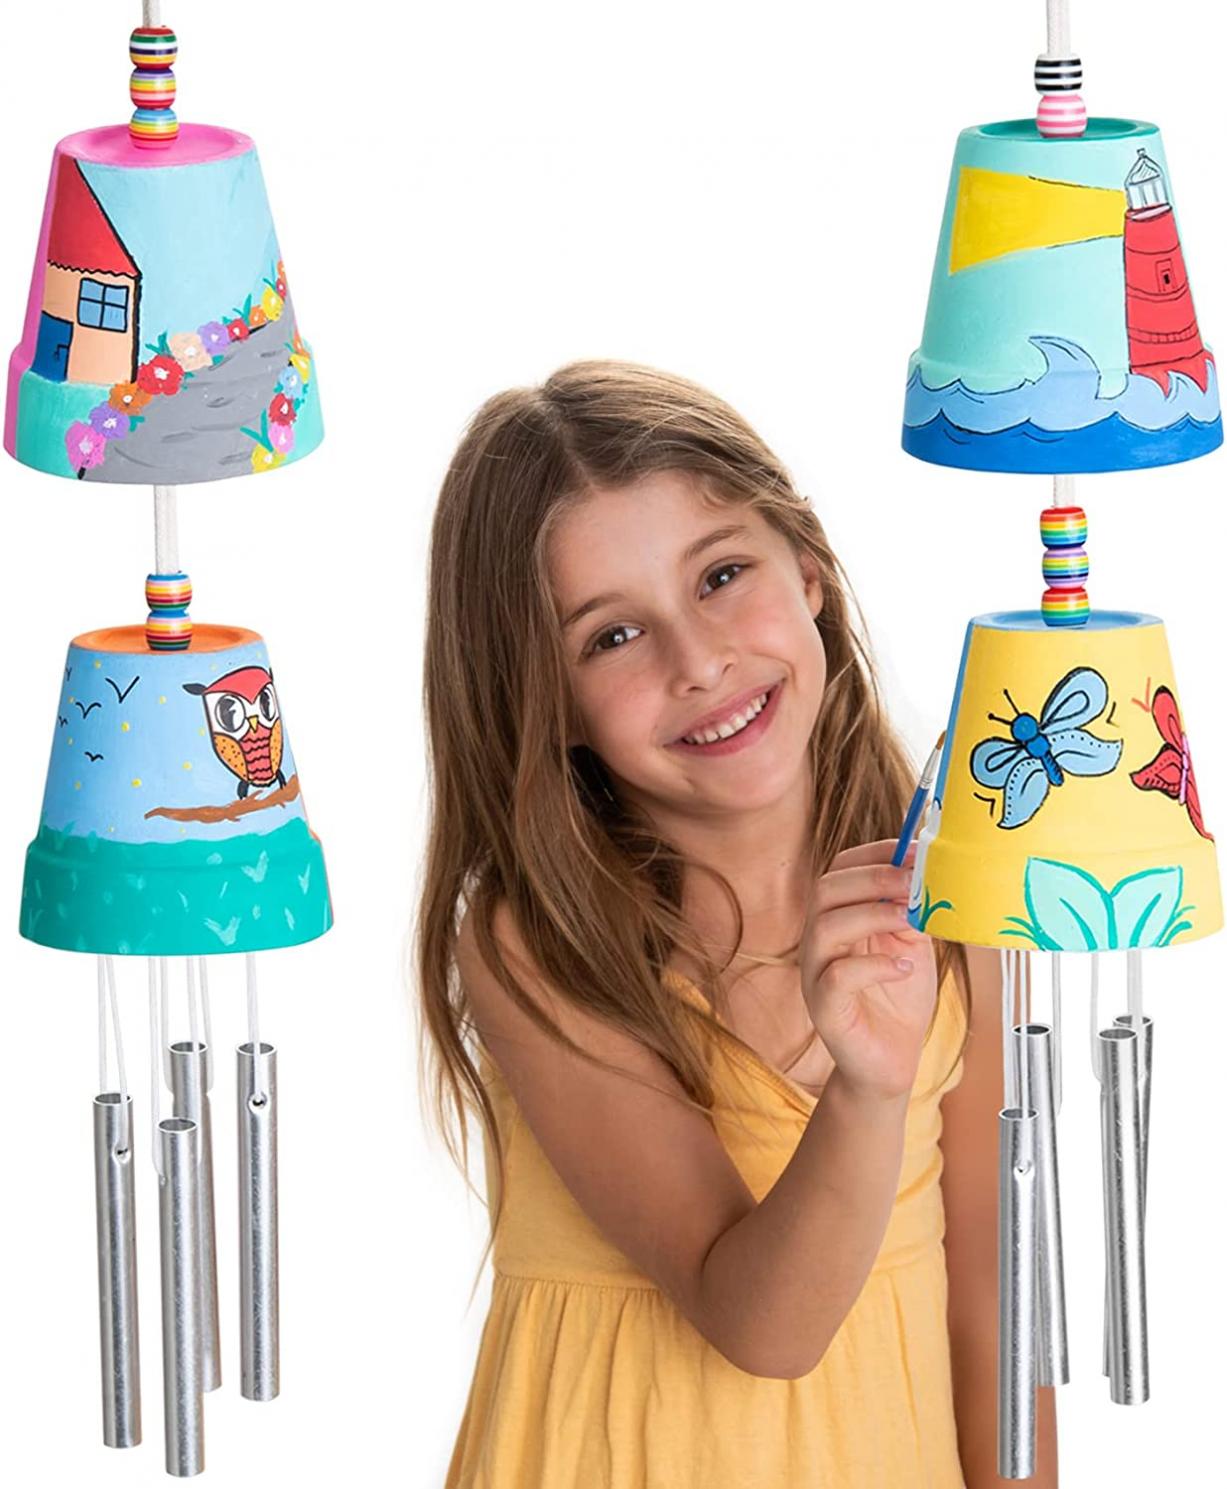 ROMI'S WAY 2-Pack Make Your Own Wind Chime Kit - Larger Bells, Stencils and Beads, Arts and Crafts for Kids Ages 8-12, 4-8 - DIY Craft Kit for Girls & Boys - Unique Art Gifts for Christmas, Birthday